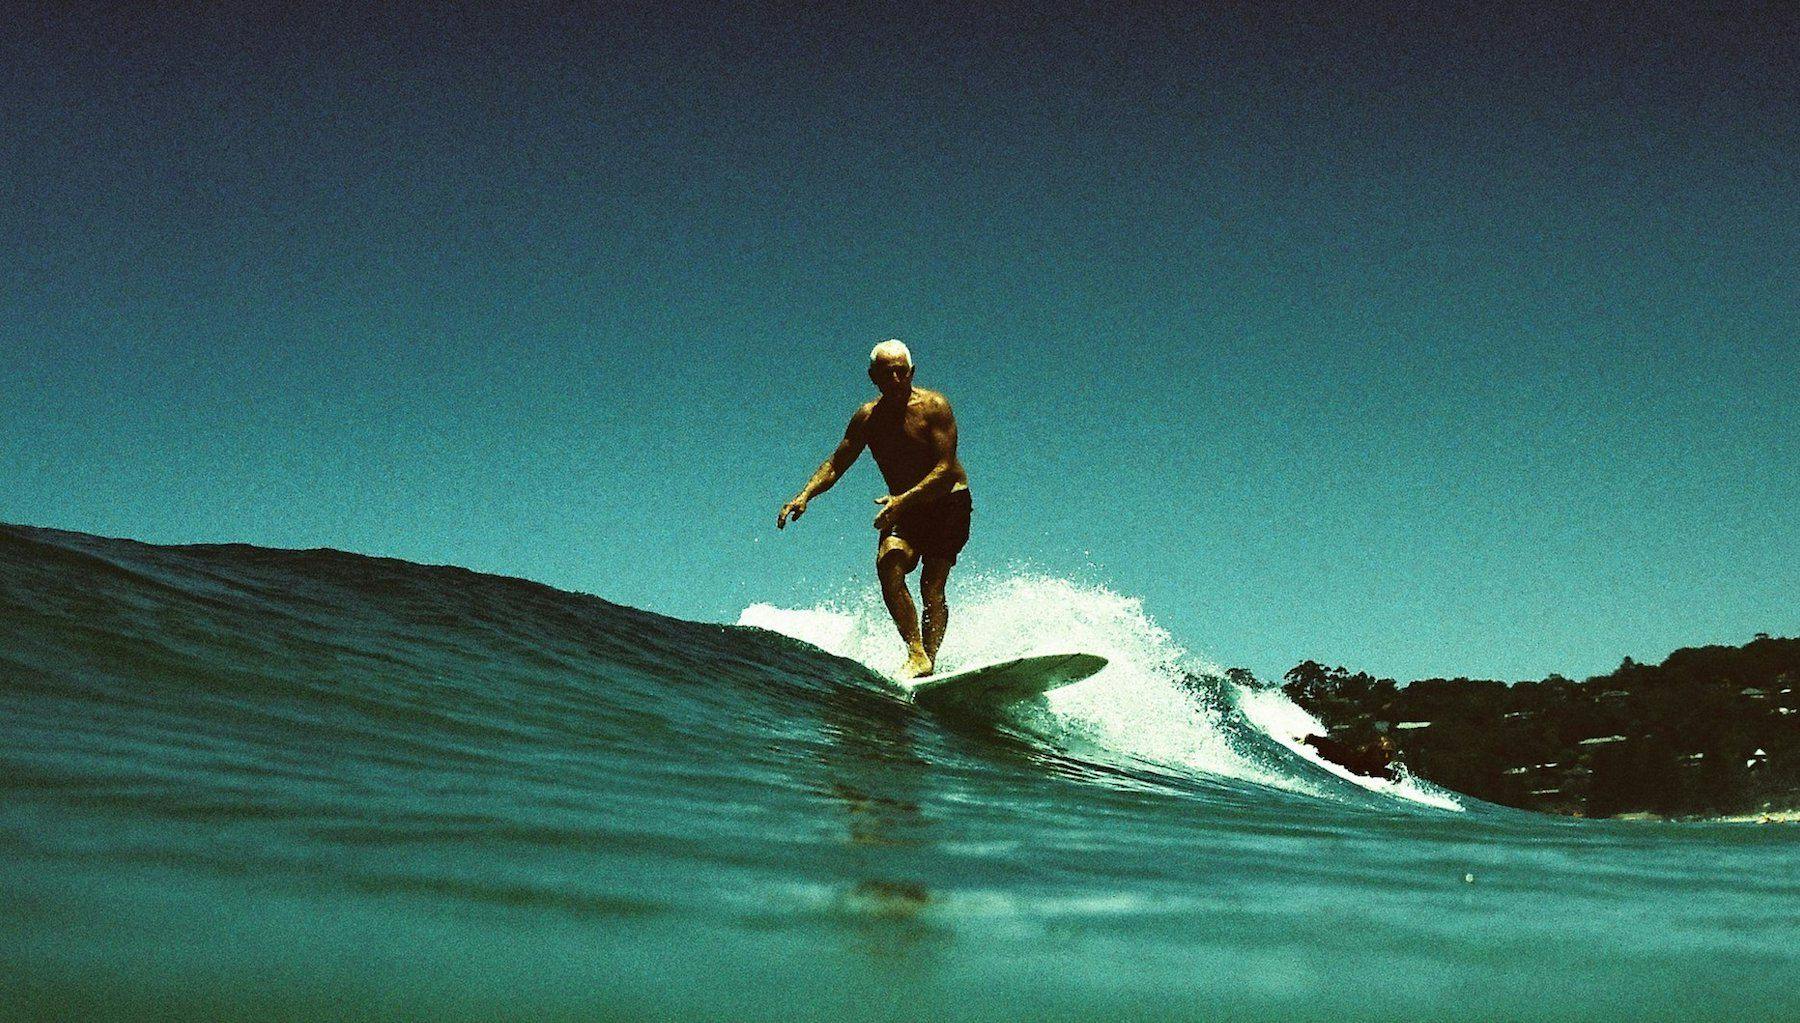 Bob Mctavish still surfing exceptionally after two hip replacements. 